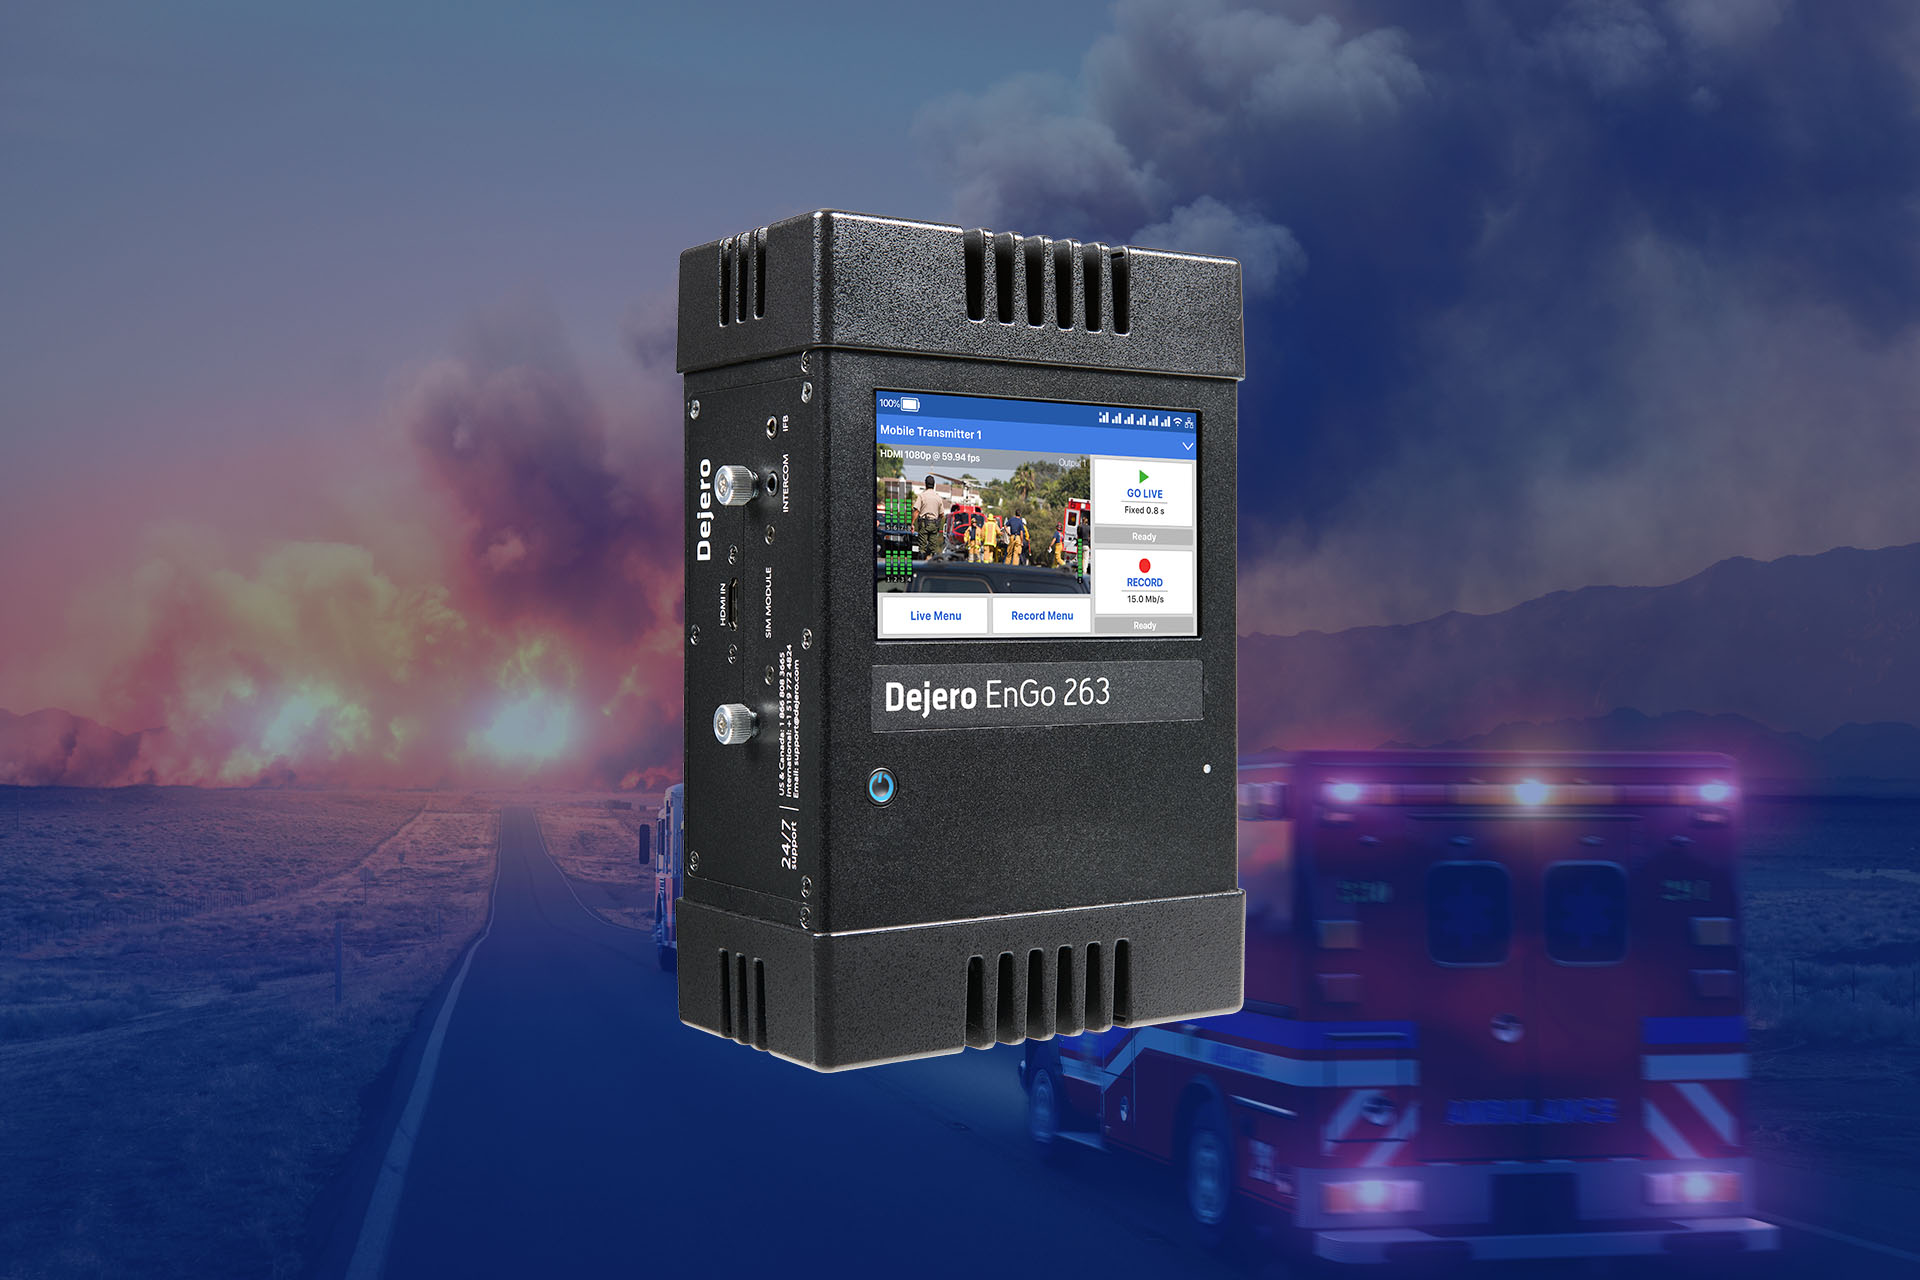 New Dejero mobile transmitter offers first responders enhanced reliability and security